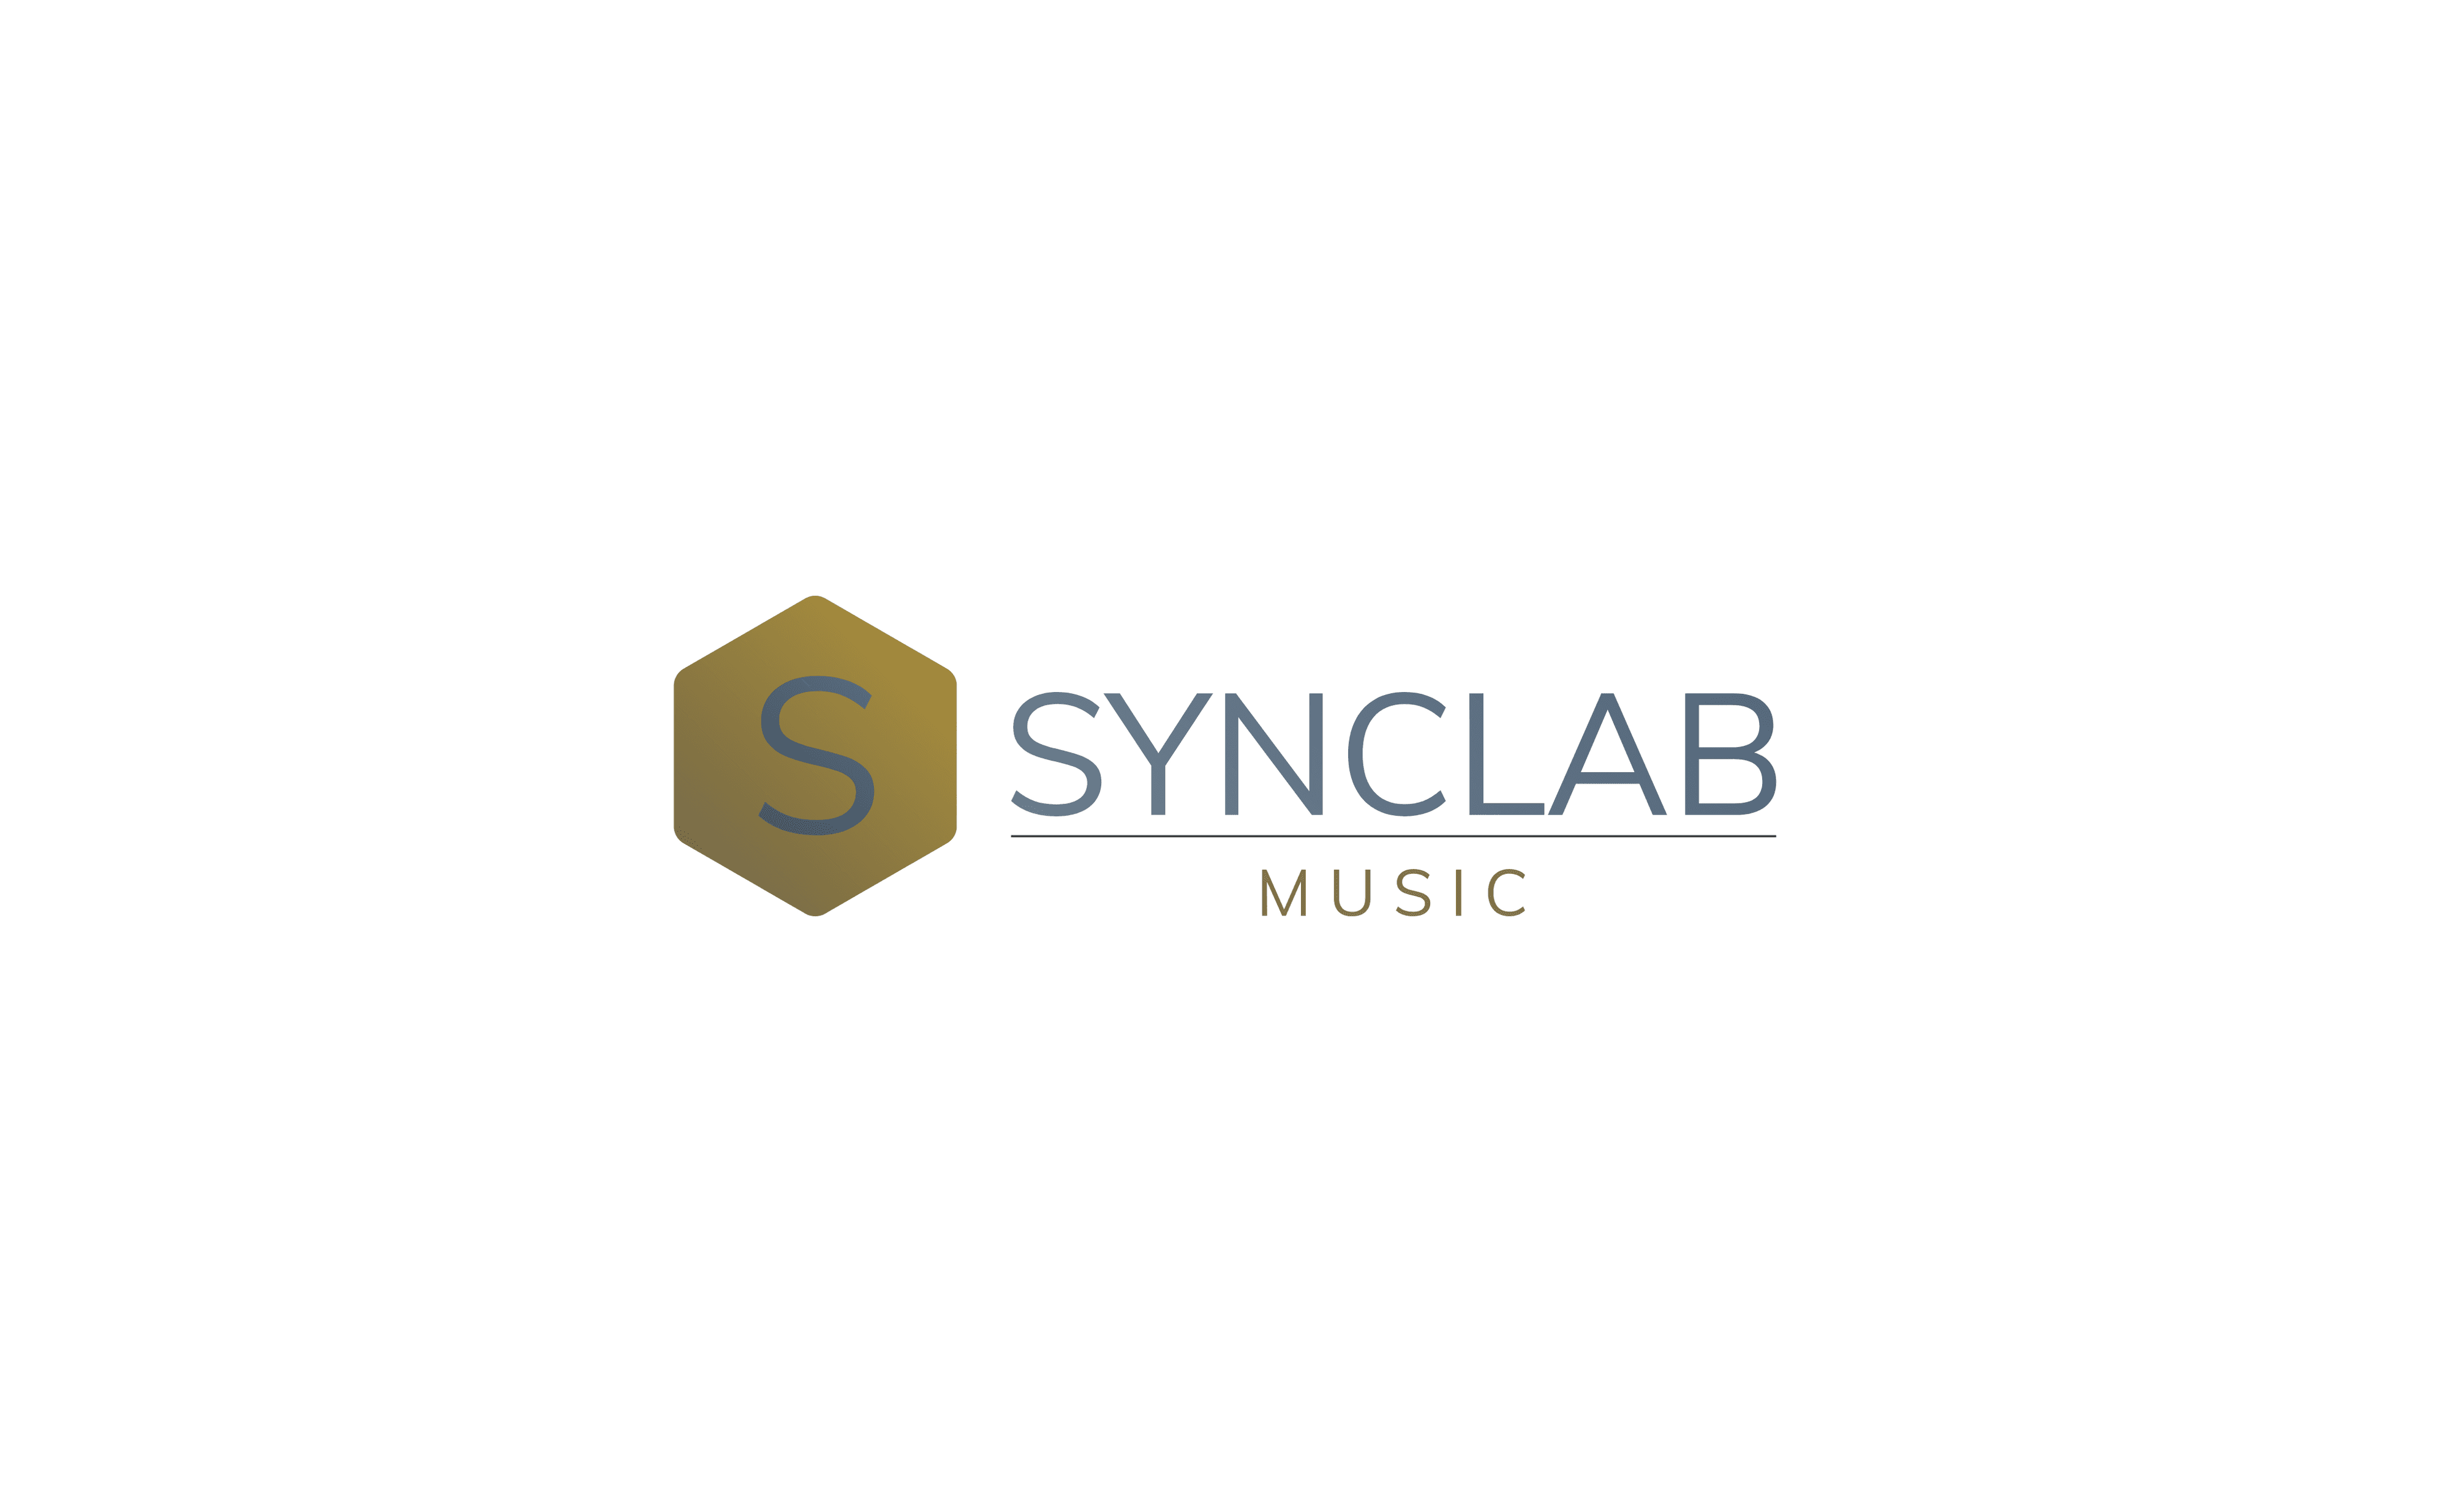 Synclab_Music 横幅